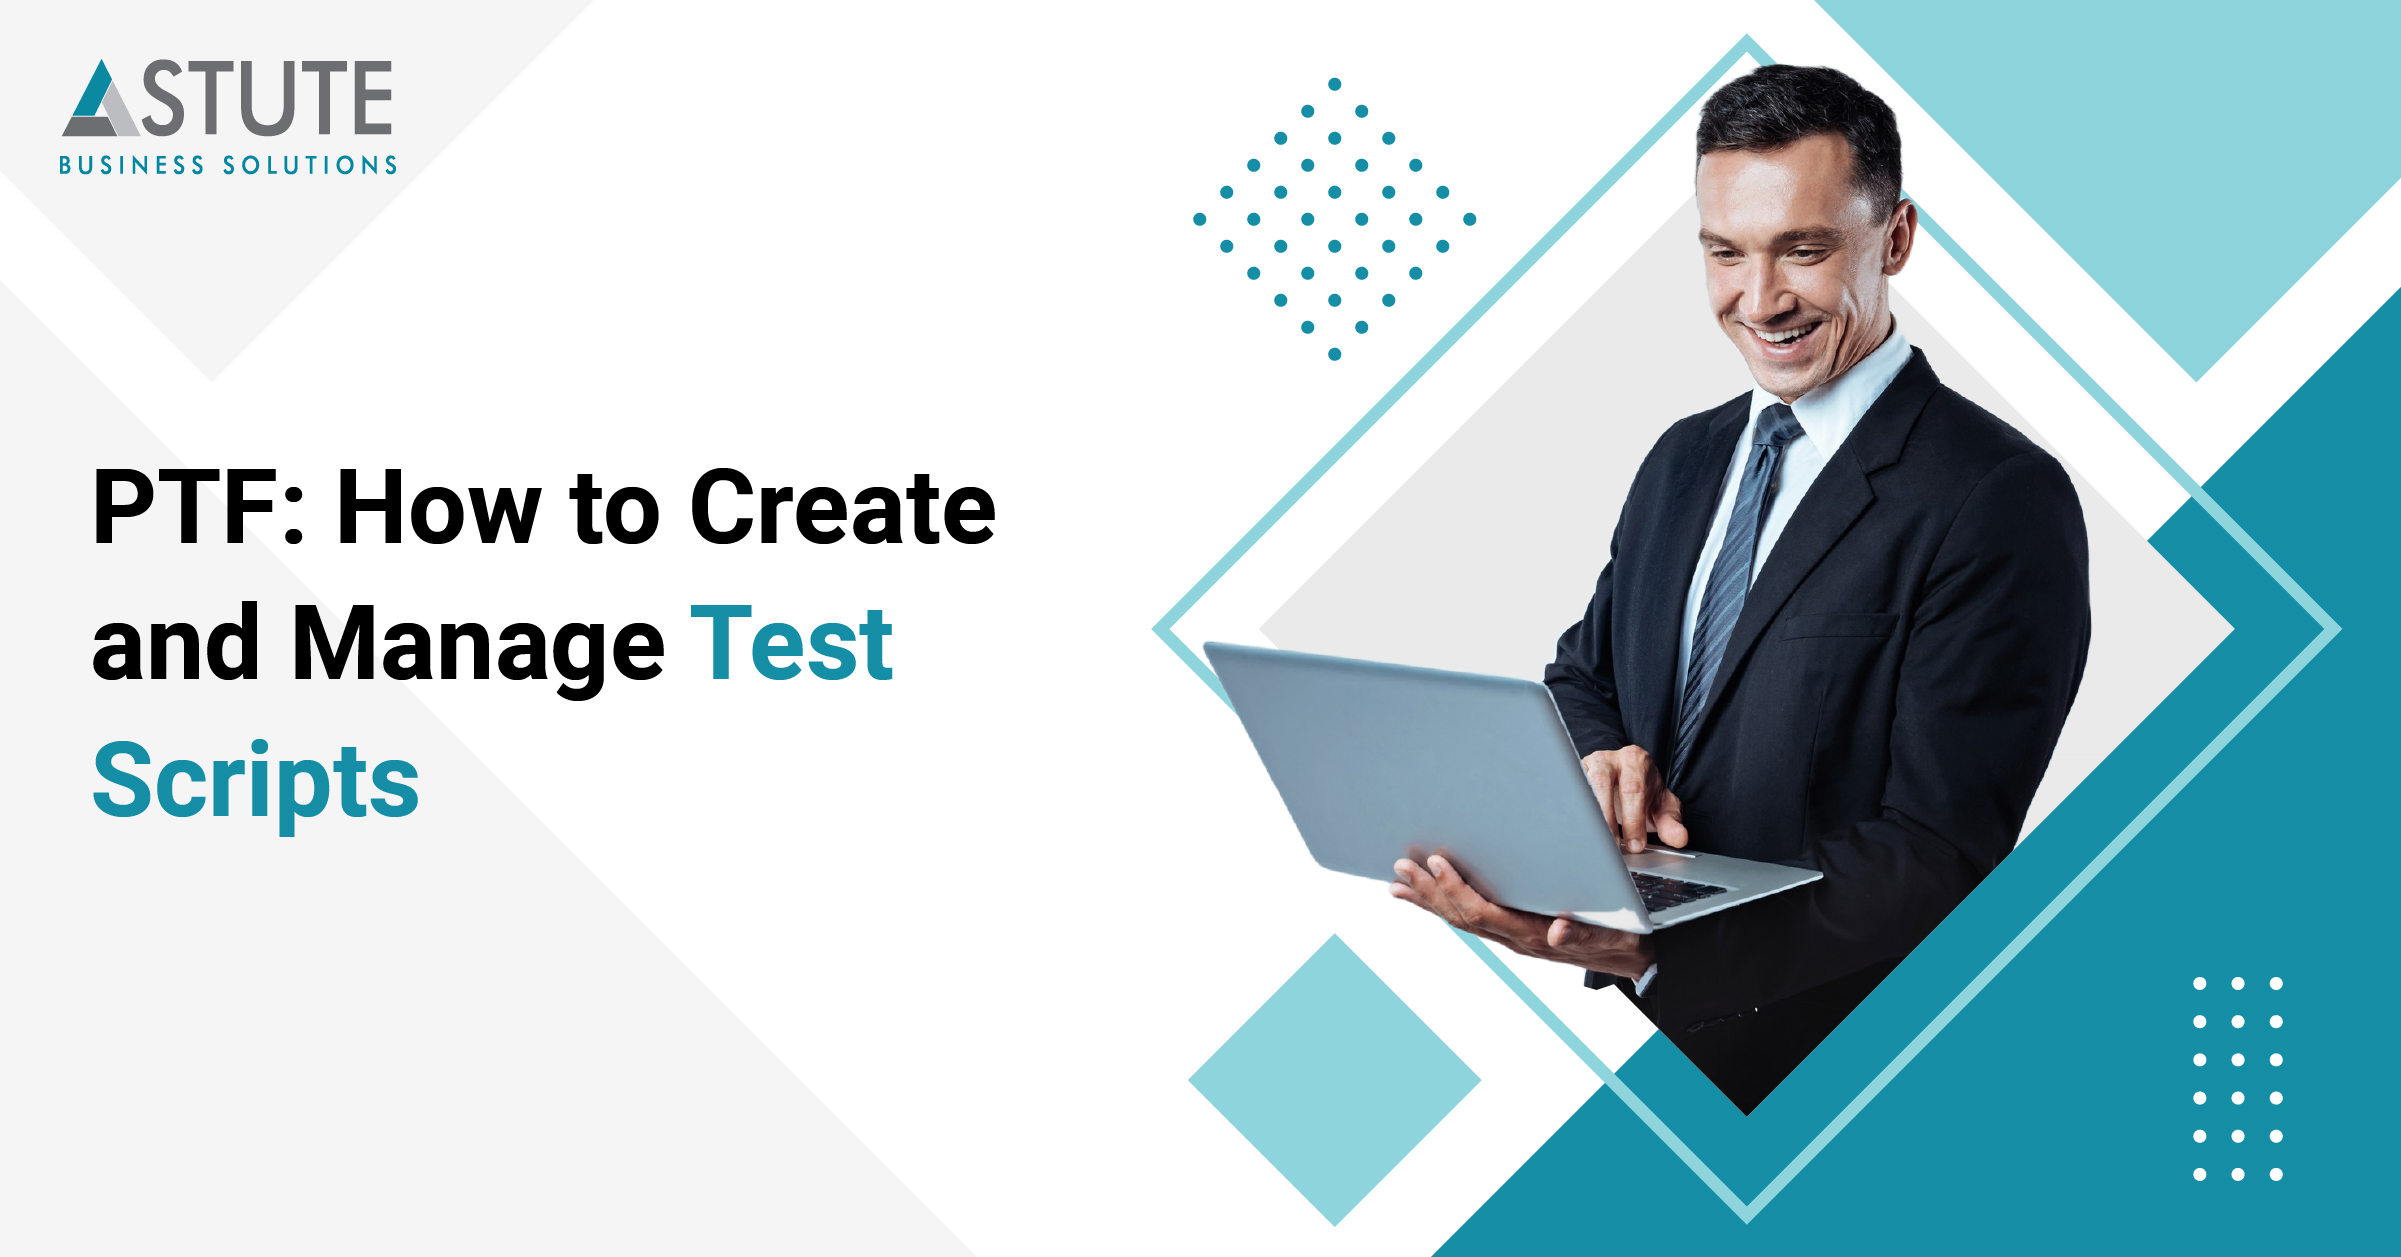 PTF: How to create and manage Test Scripts